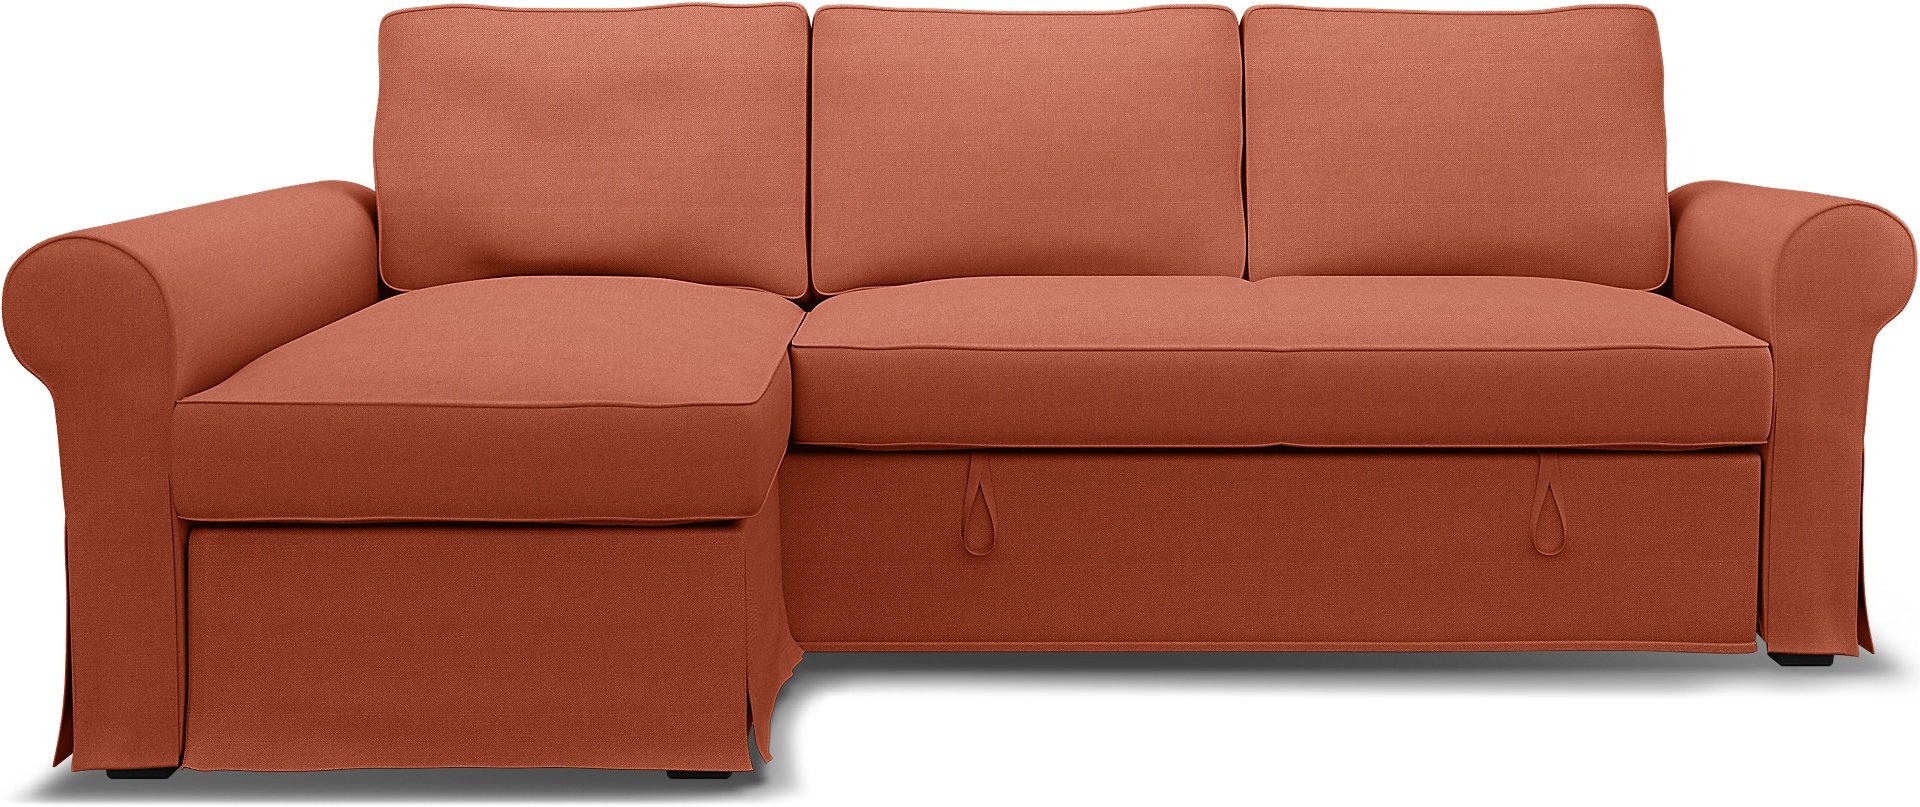 IKEA - Backabro Sofabed with Chaise Cover, Burnt Orange, Linen - Bemz